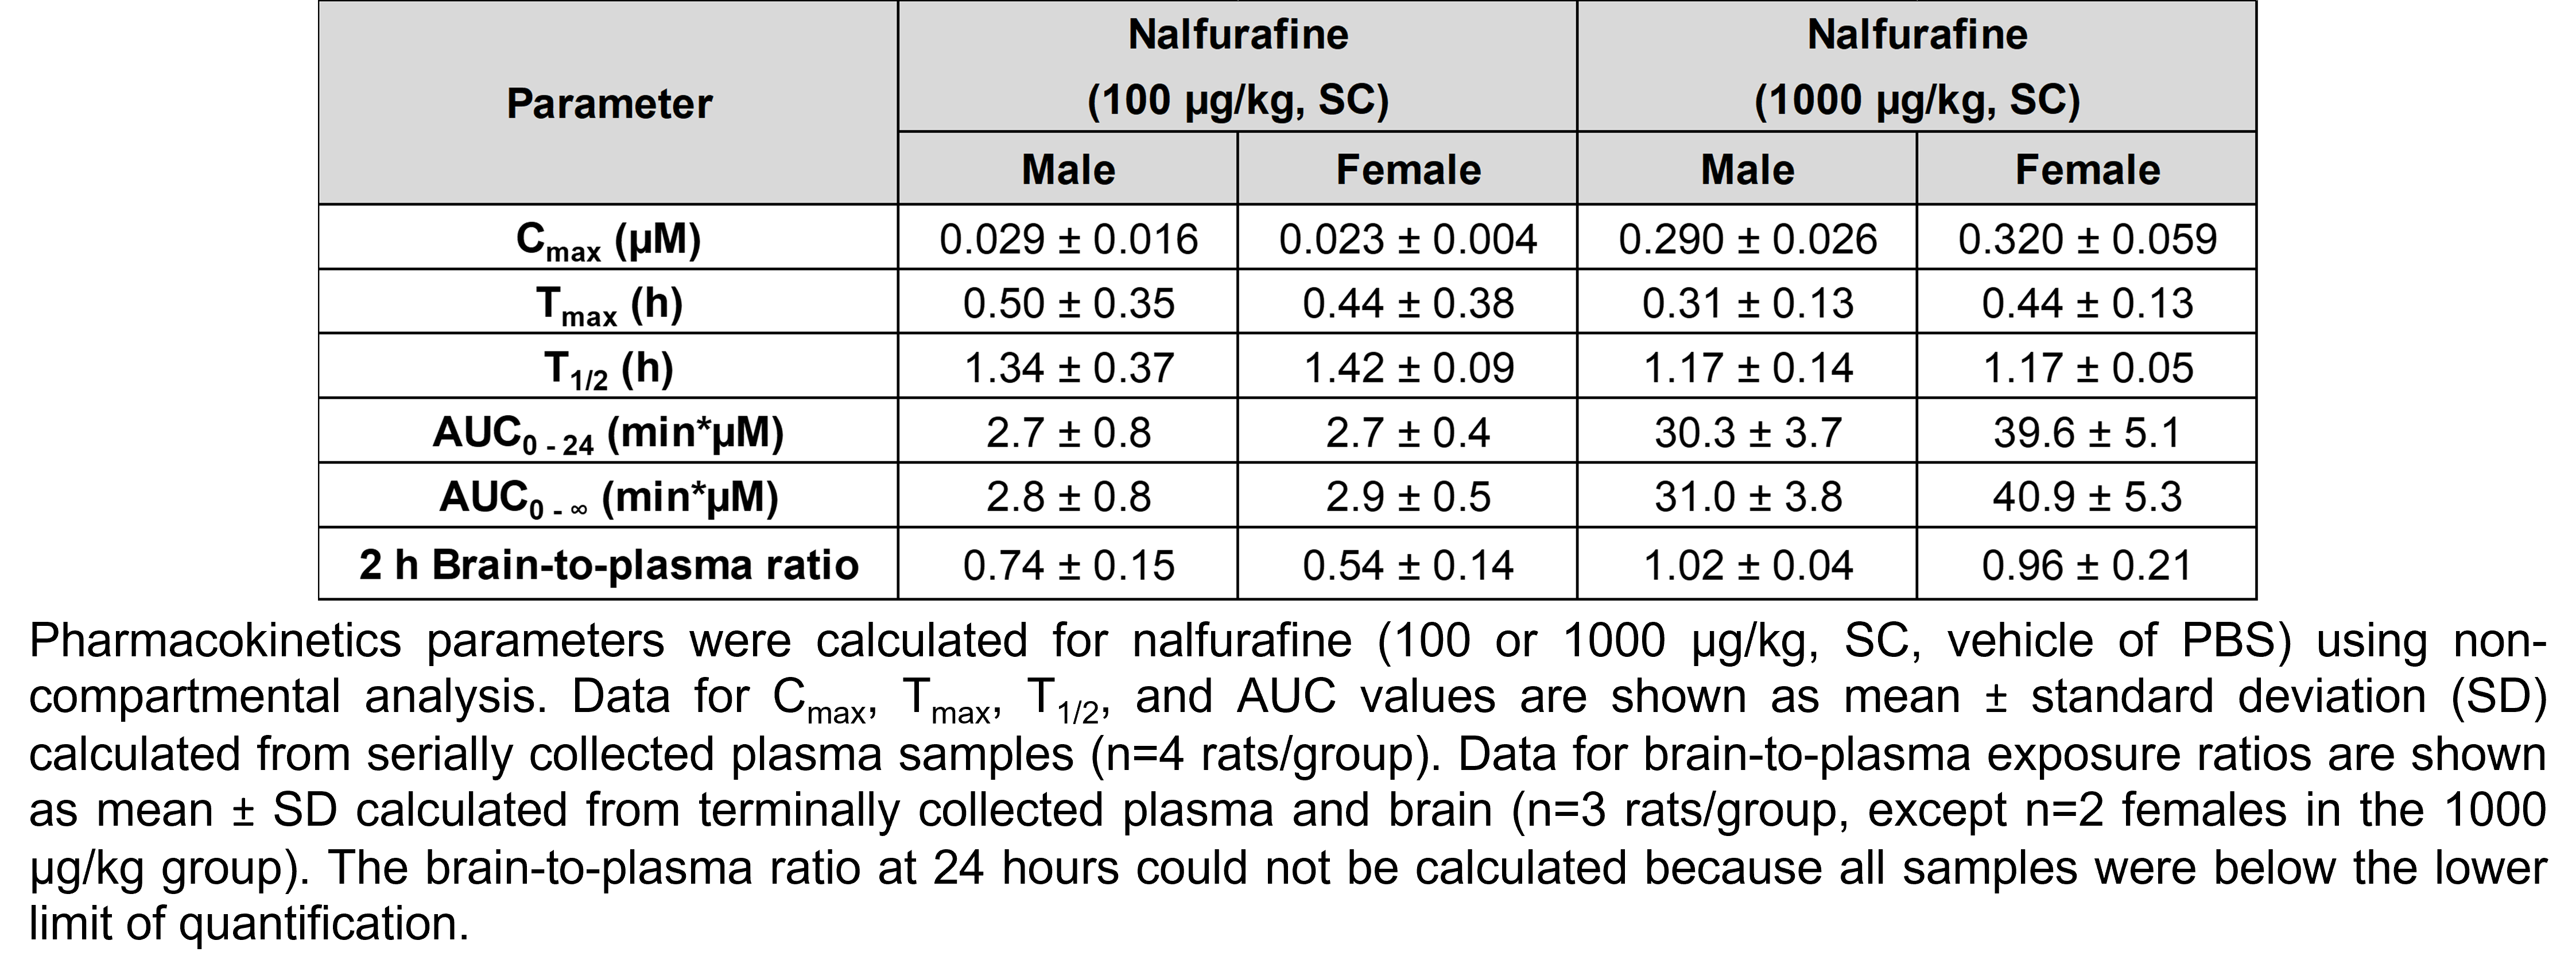 A table shows pharmacokinetics parameters calculated for nalfurafine using non-compartmental analysis in male and female rats treated with nalfurafine (100 or 1000 µg/kg, SC, vehicle of PBS). The means for the 4 groups (males and females treated with 100 µg/kg nalfurafine and males and females treated with 1000 µg/kg nalfurafine, respectively) are as follows. The highest concentration (Cmax) was 0.029, 0.023, 0.29, and 0.32 µM; the time at the maximum concentration (Tmax) was 0.5, 0.44, 0.31, and 0.44 hours; the half-life (T1/2) was 1.34, 1.42, 1.17, and 1.17 hours; area under the curve for time 0 to 24 hours was 2.7, 2.7, 30.3, and 39.6 minutes*µM; area under the curve for time 0 to infinity was 2.8, 2.9, 31, and 40.9 minutes*µM; the brain-to-plasma ratio at 2 hours was 0.74, 0.54, 1.02, and 0.96; the brain-to-plasma ratio at 24 hours could not be calculated because all samples were below the lower limit of quantification.